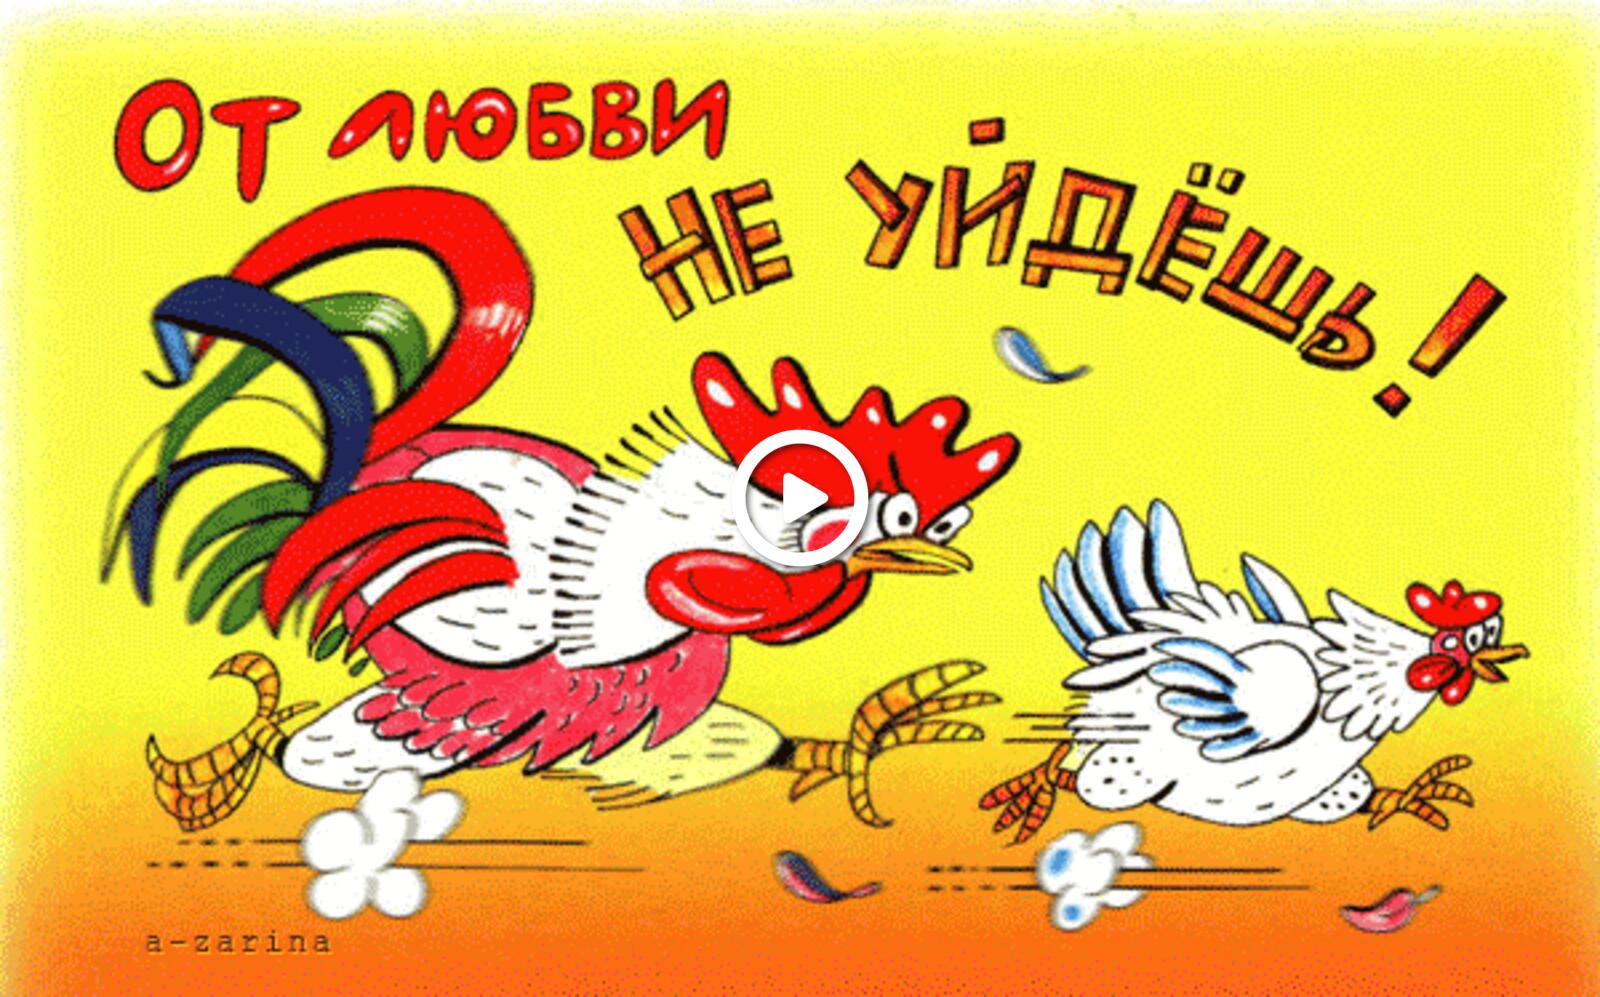 A postcard on the subject of chicken rooster humor for free